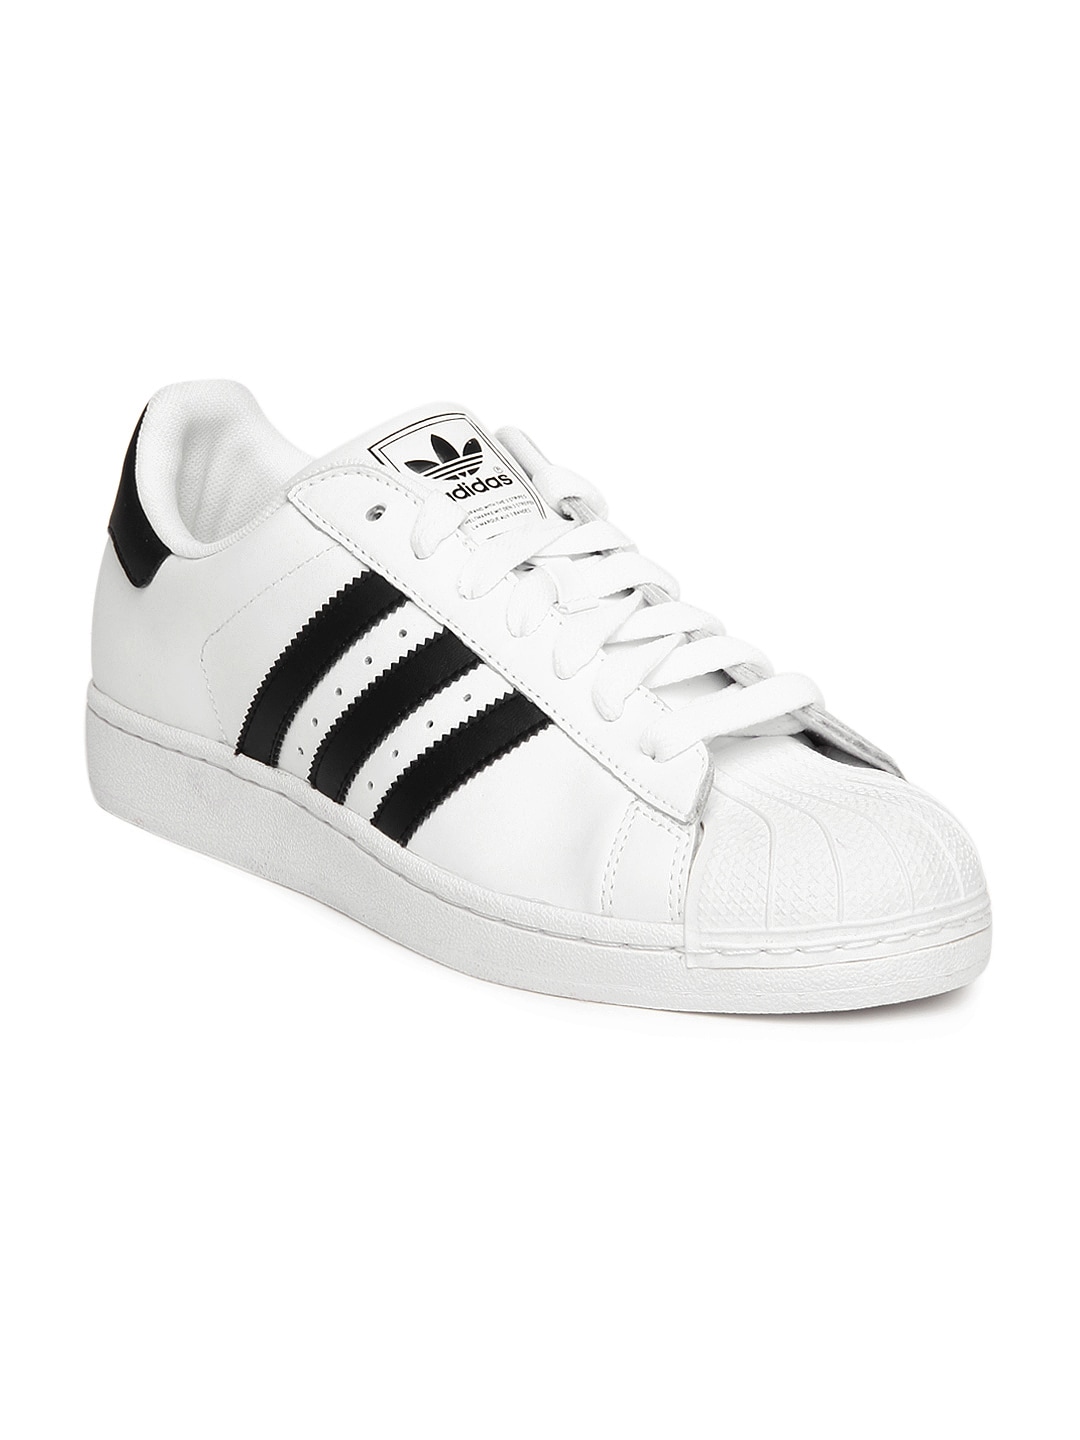 Cheap Adidas Men's Superstar Adicolor Casual Sneakers From ca